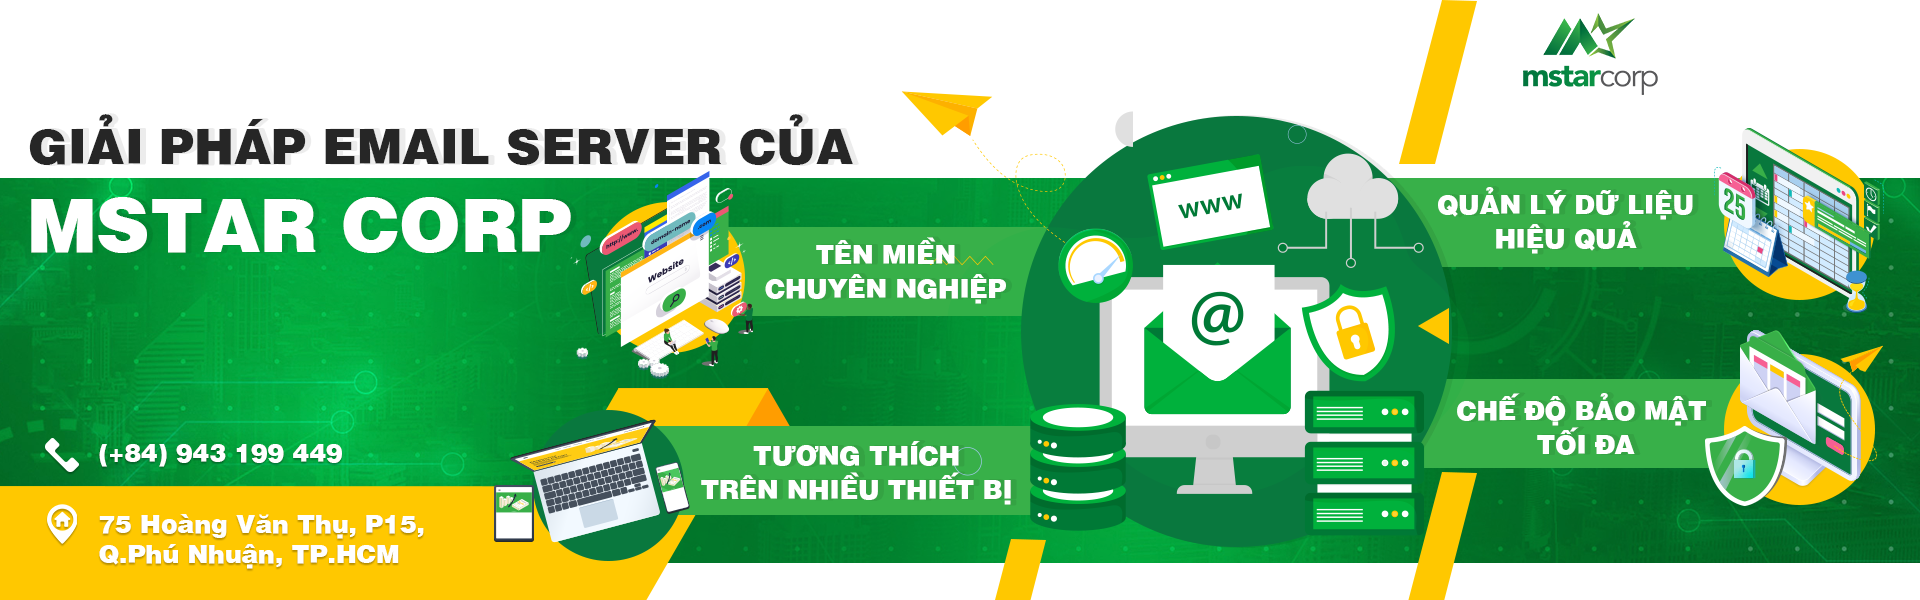 Dịch vụ Email Server của Mstar Corp